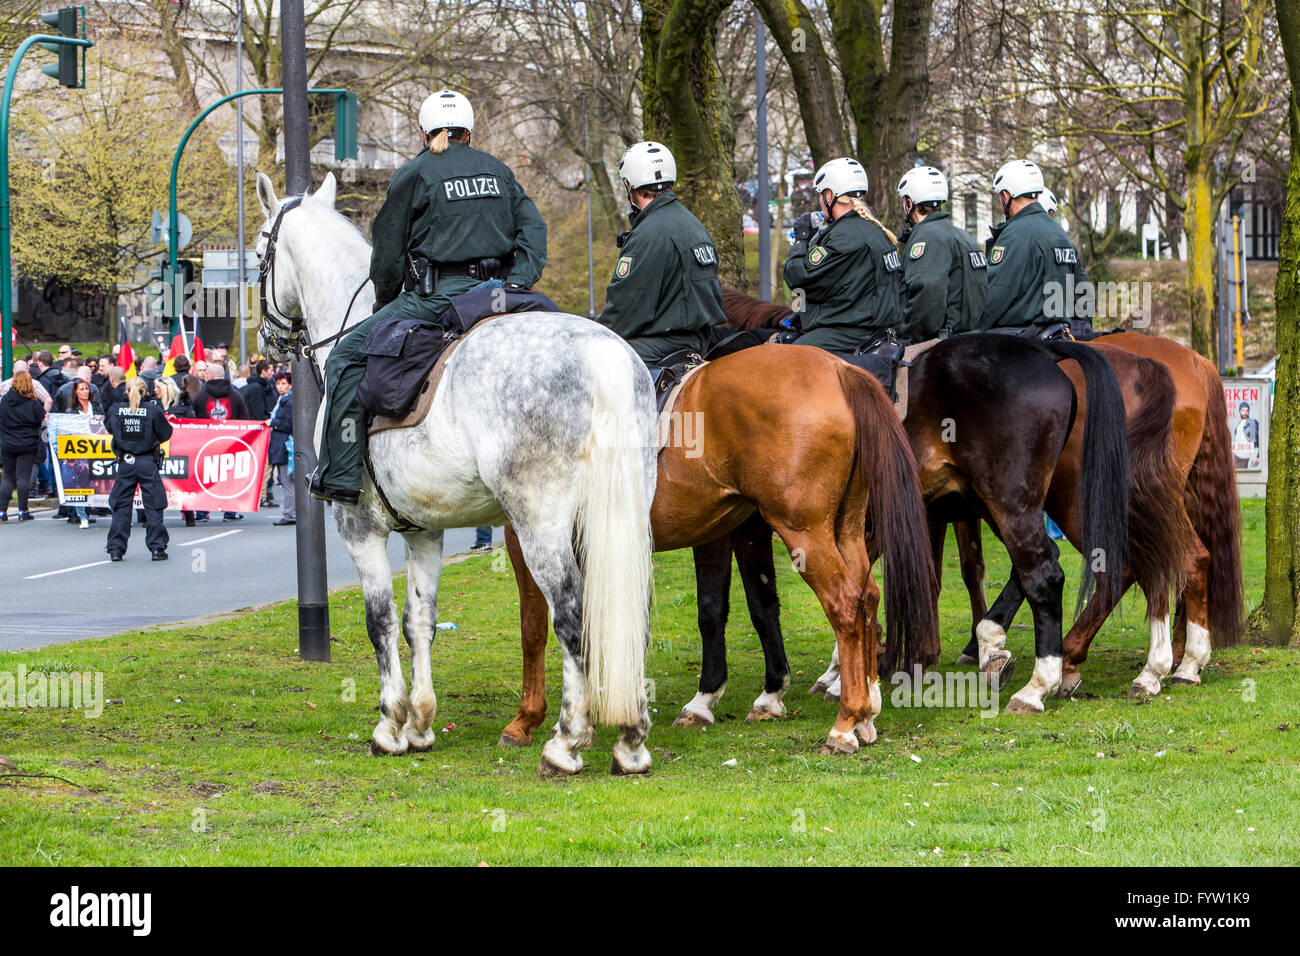 Demonstration of right wing, neo Nazi party NPD, in Essen, Germany, counter demonstration of left wing groups, police operation Stock Photo